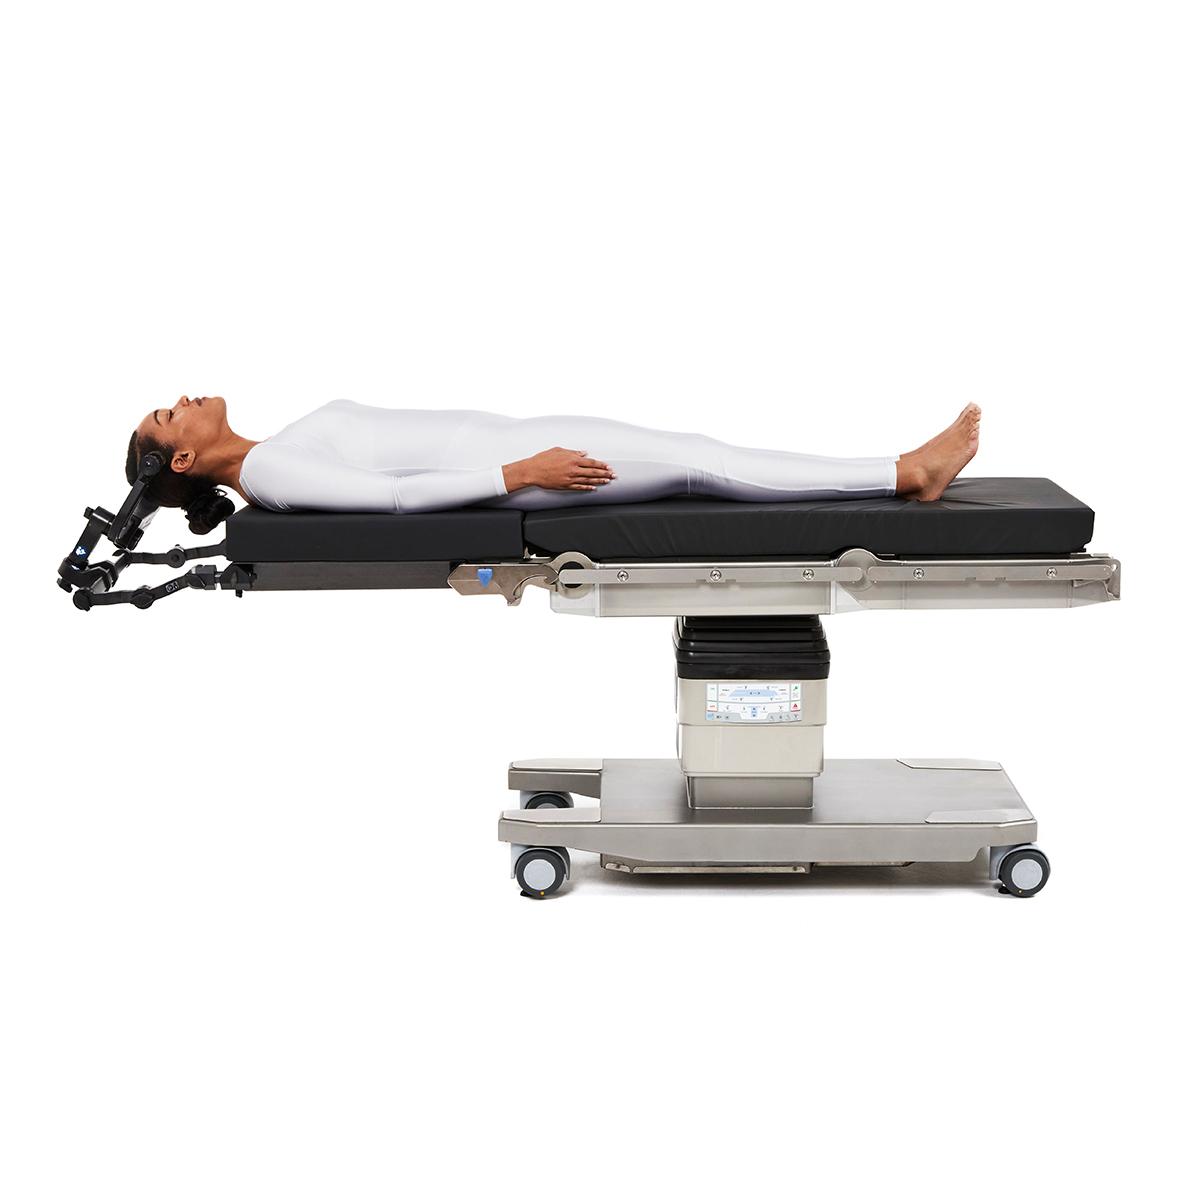 Patient positioned with Neuro Radiolucent accessory OR table package for neurosurgery.